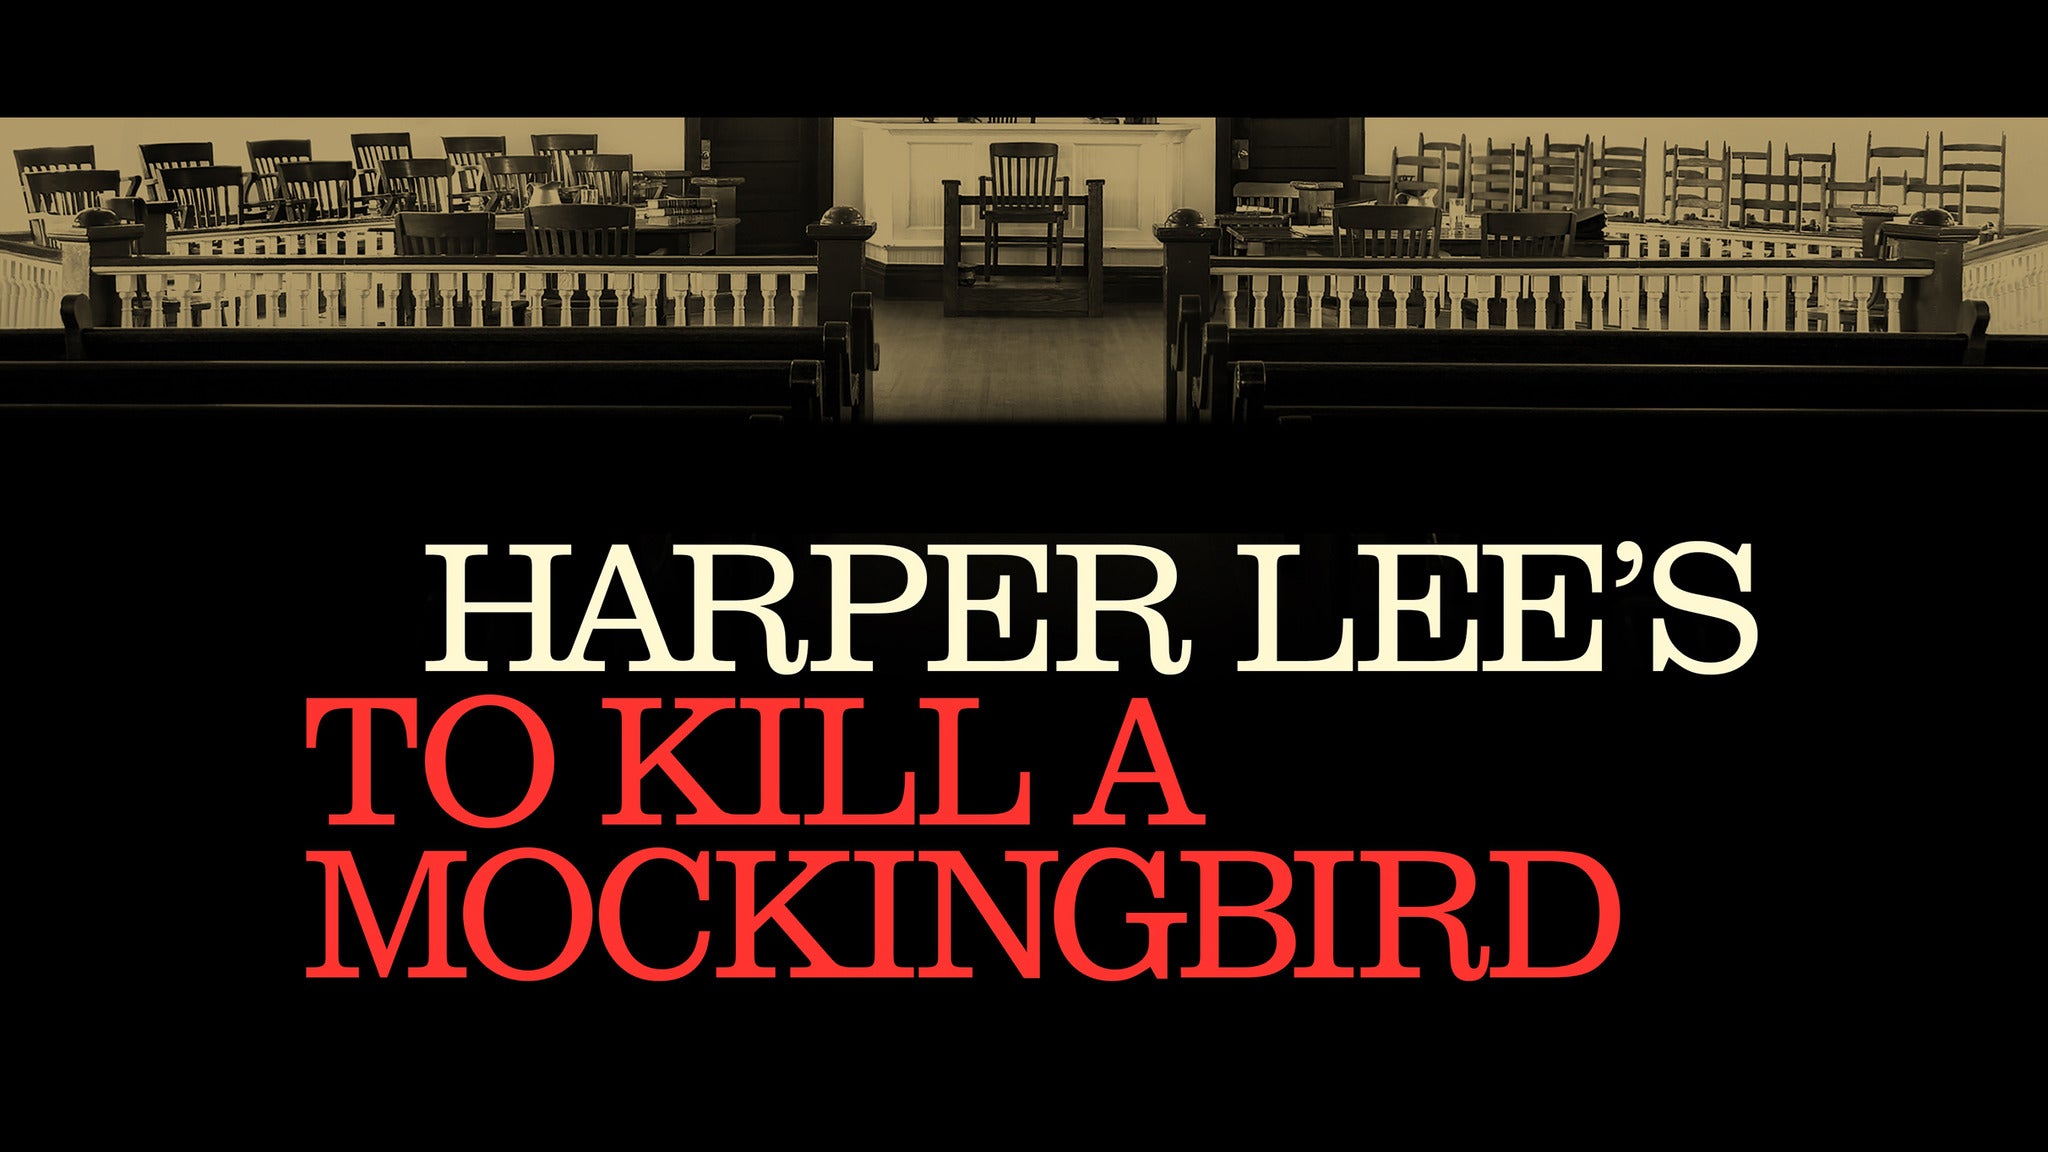 To Kill a Mockingbird (Touring) presale password for advance tickets in St. Louis